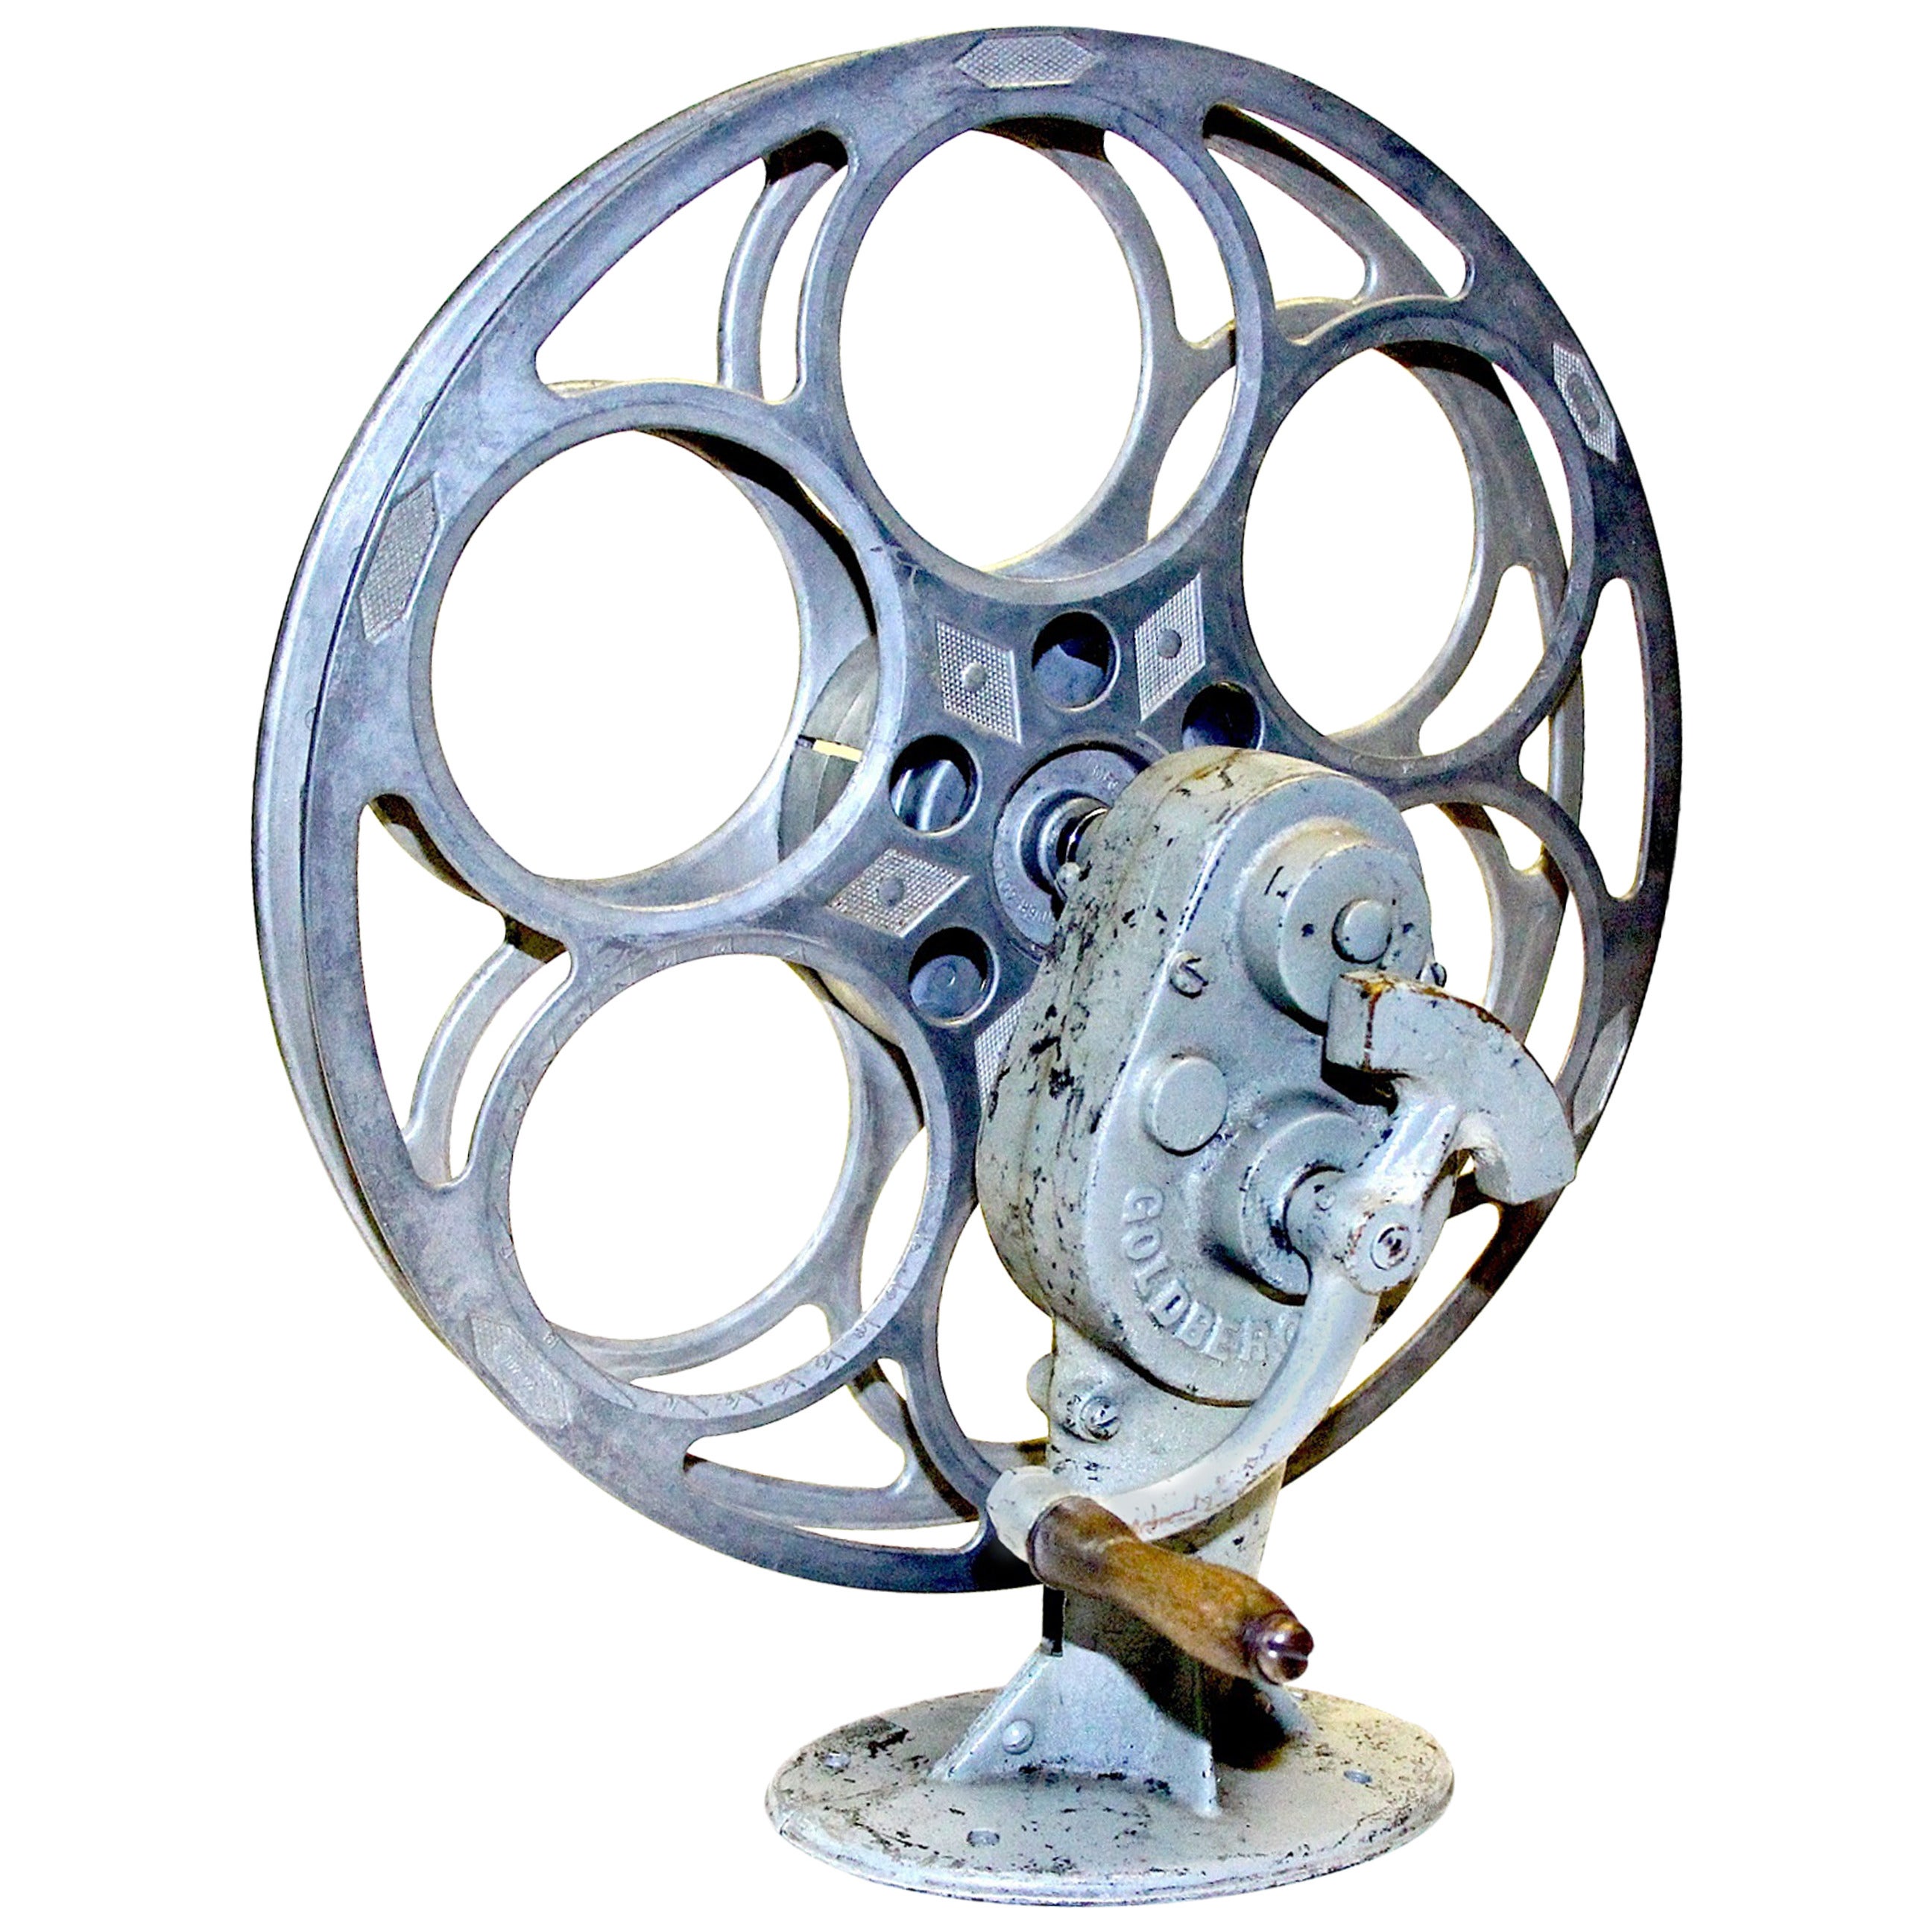 Cinema Rewind With Vintage Film Reel, circa 1930, as Sculpture, Sold with Film For Sale